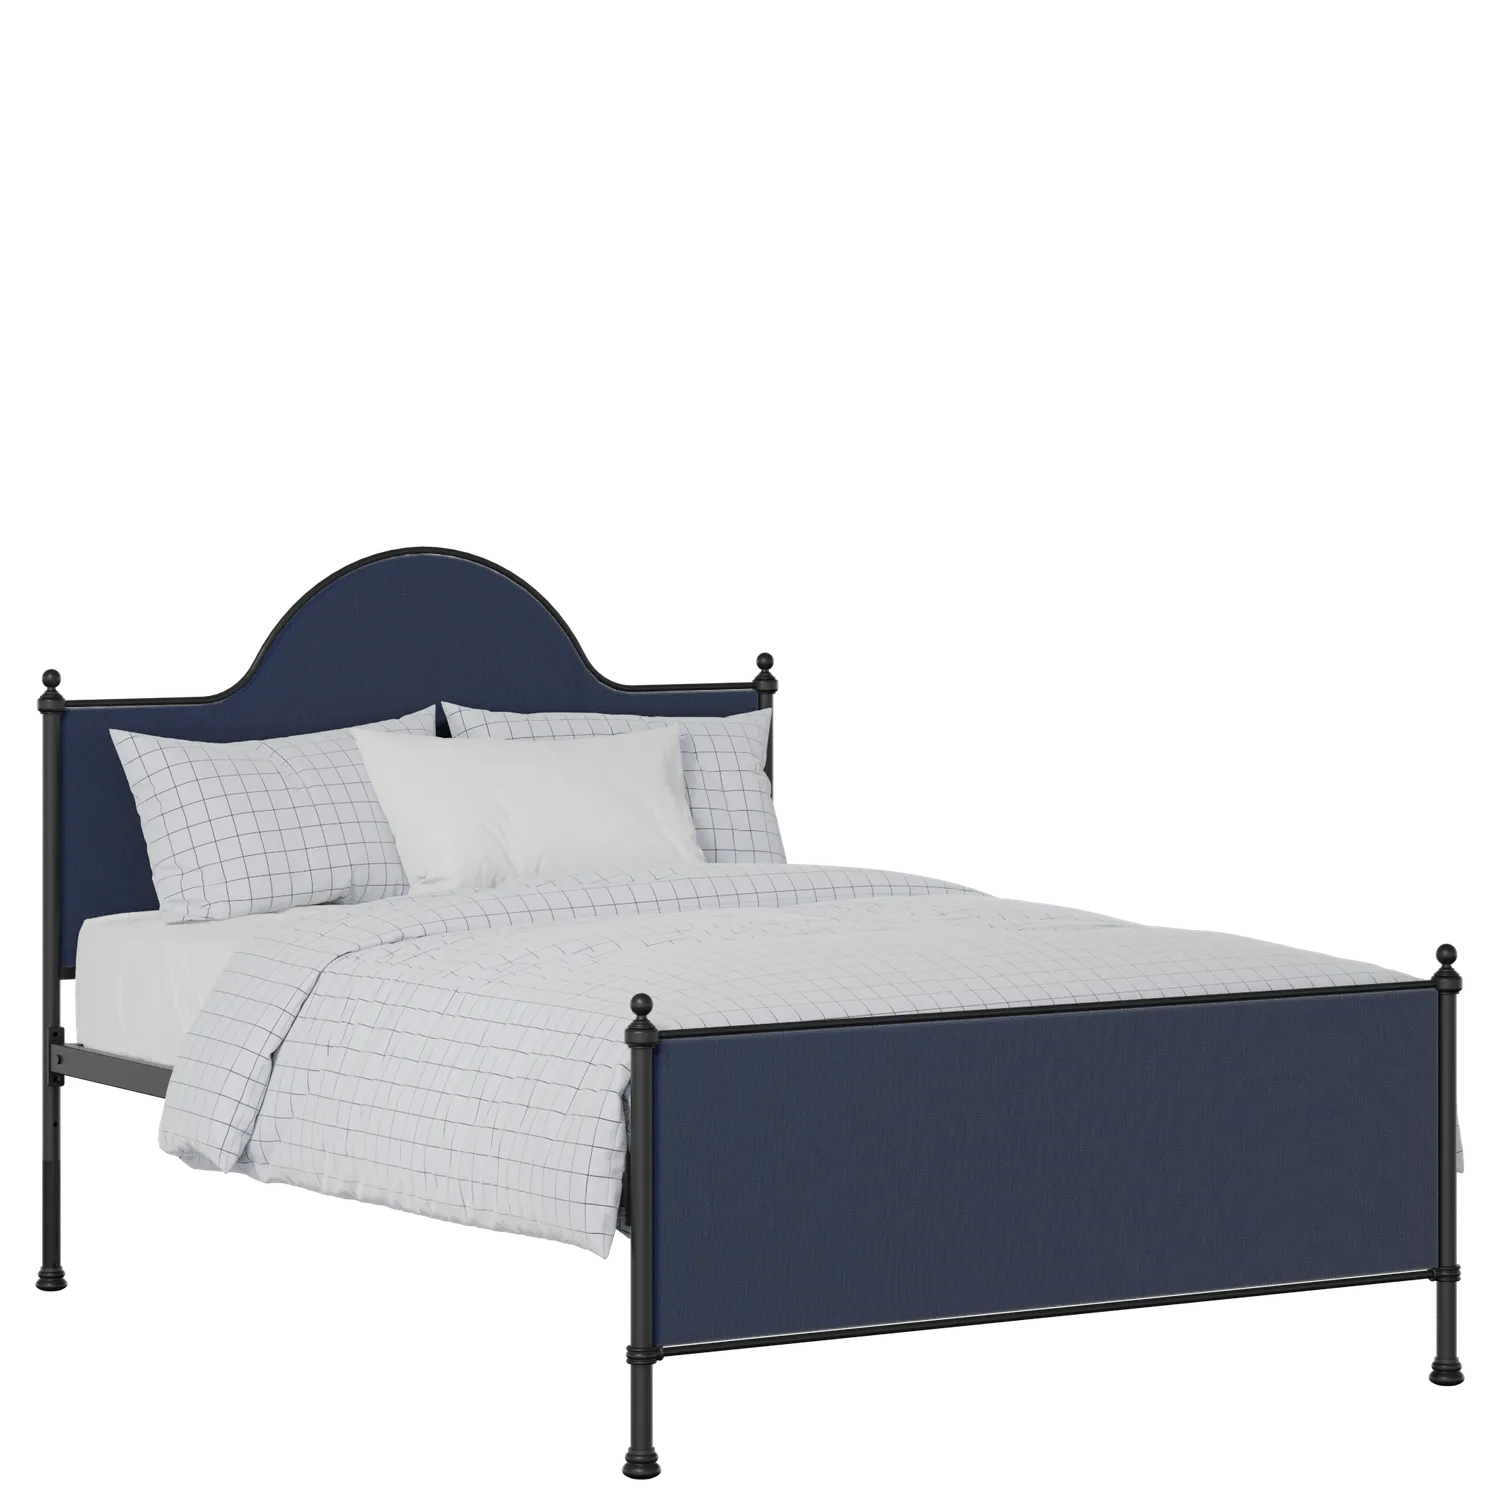 Albert iron/metal upholstered bed in black with blue fabric